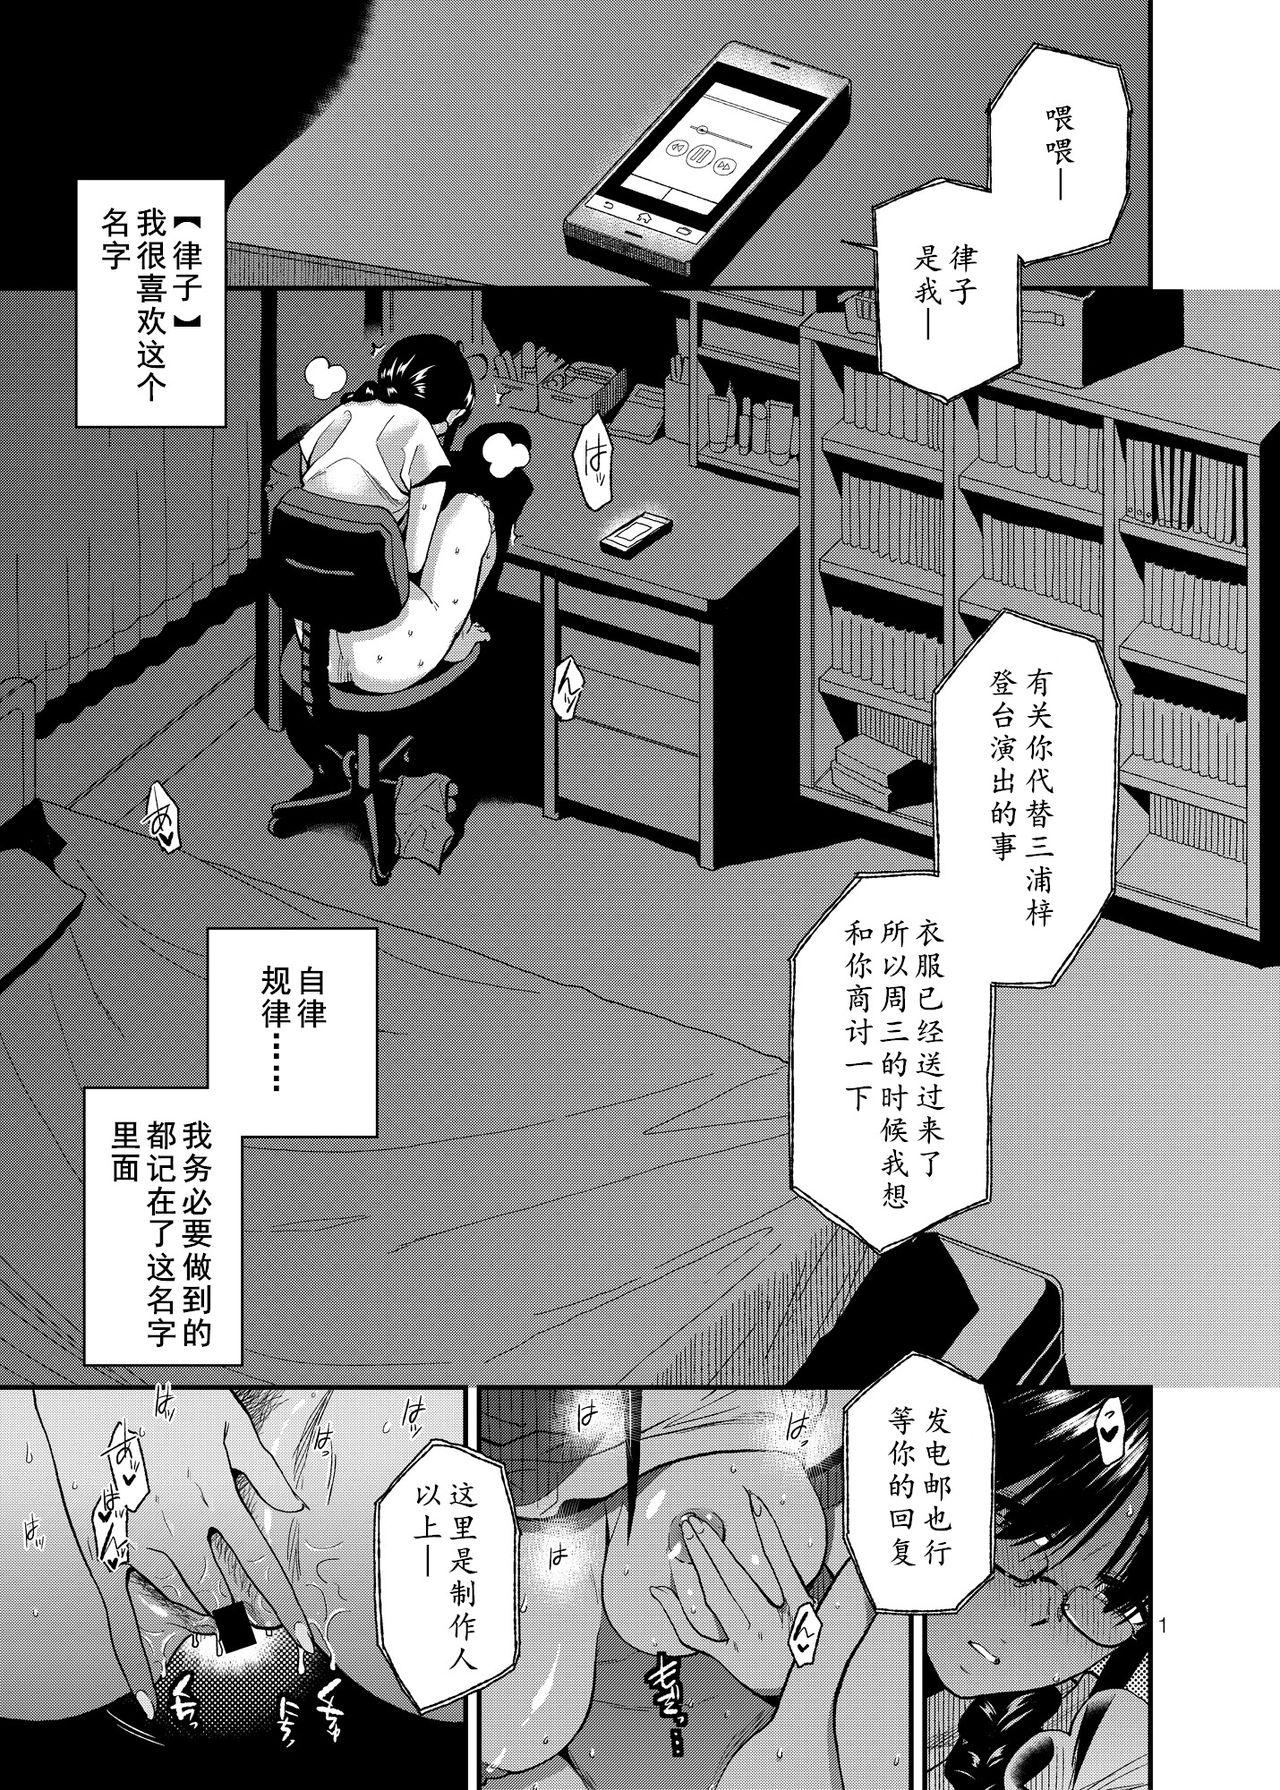 Special Locations UNCONTROLLABLE | 全面失控 - The idolmaster Screaming - Page 3